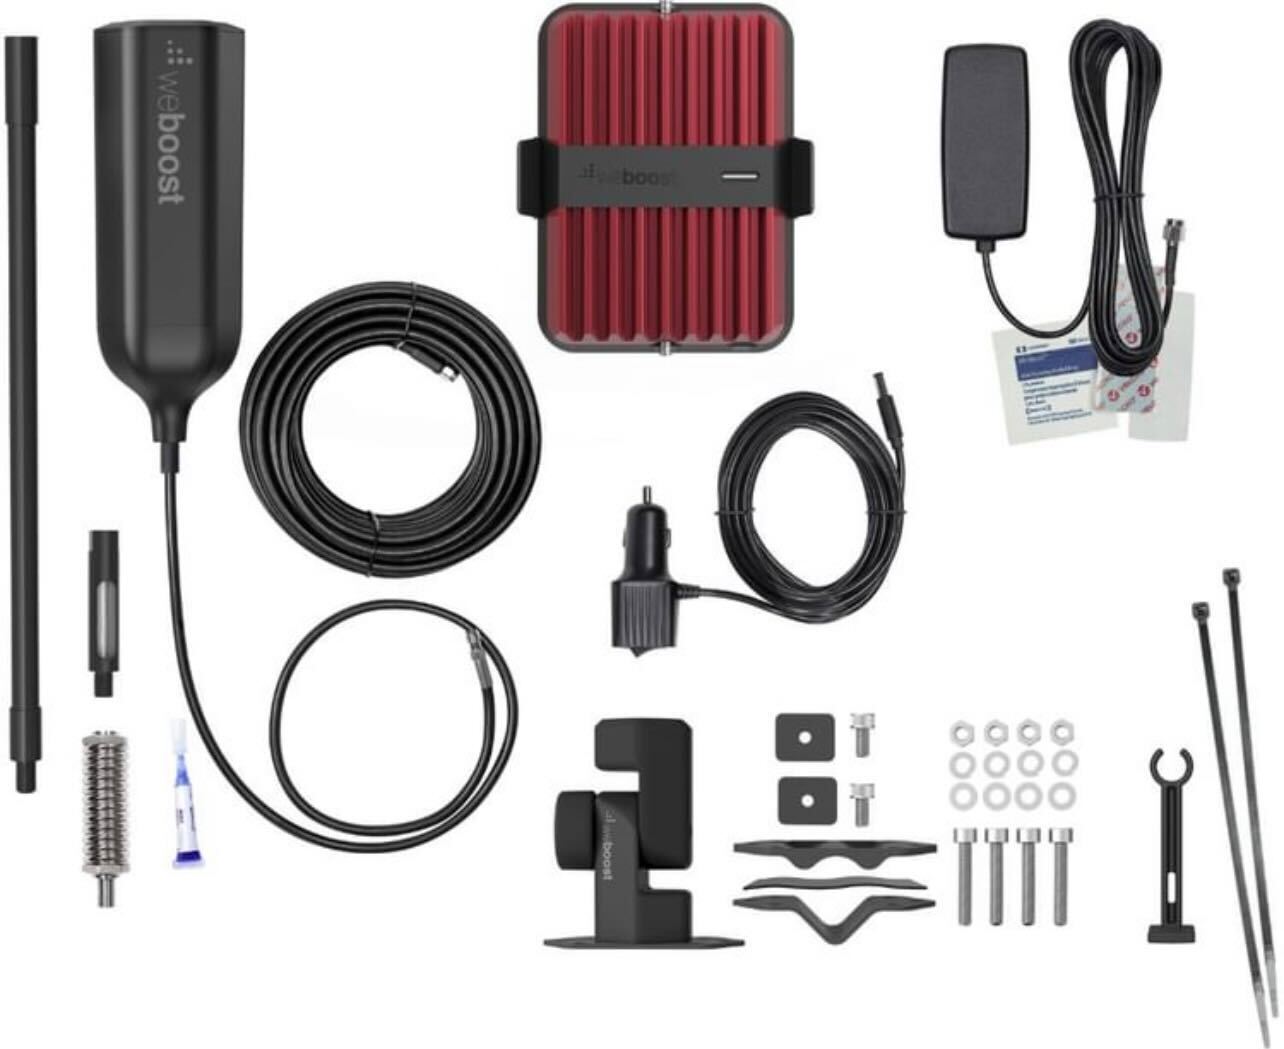 The components of the Drive Reach Overland by weBoost.